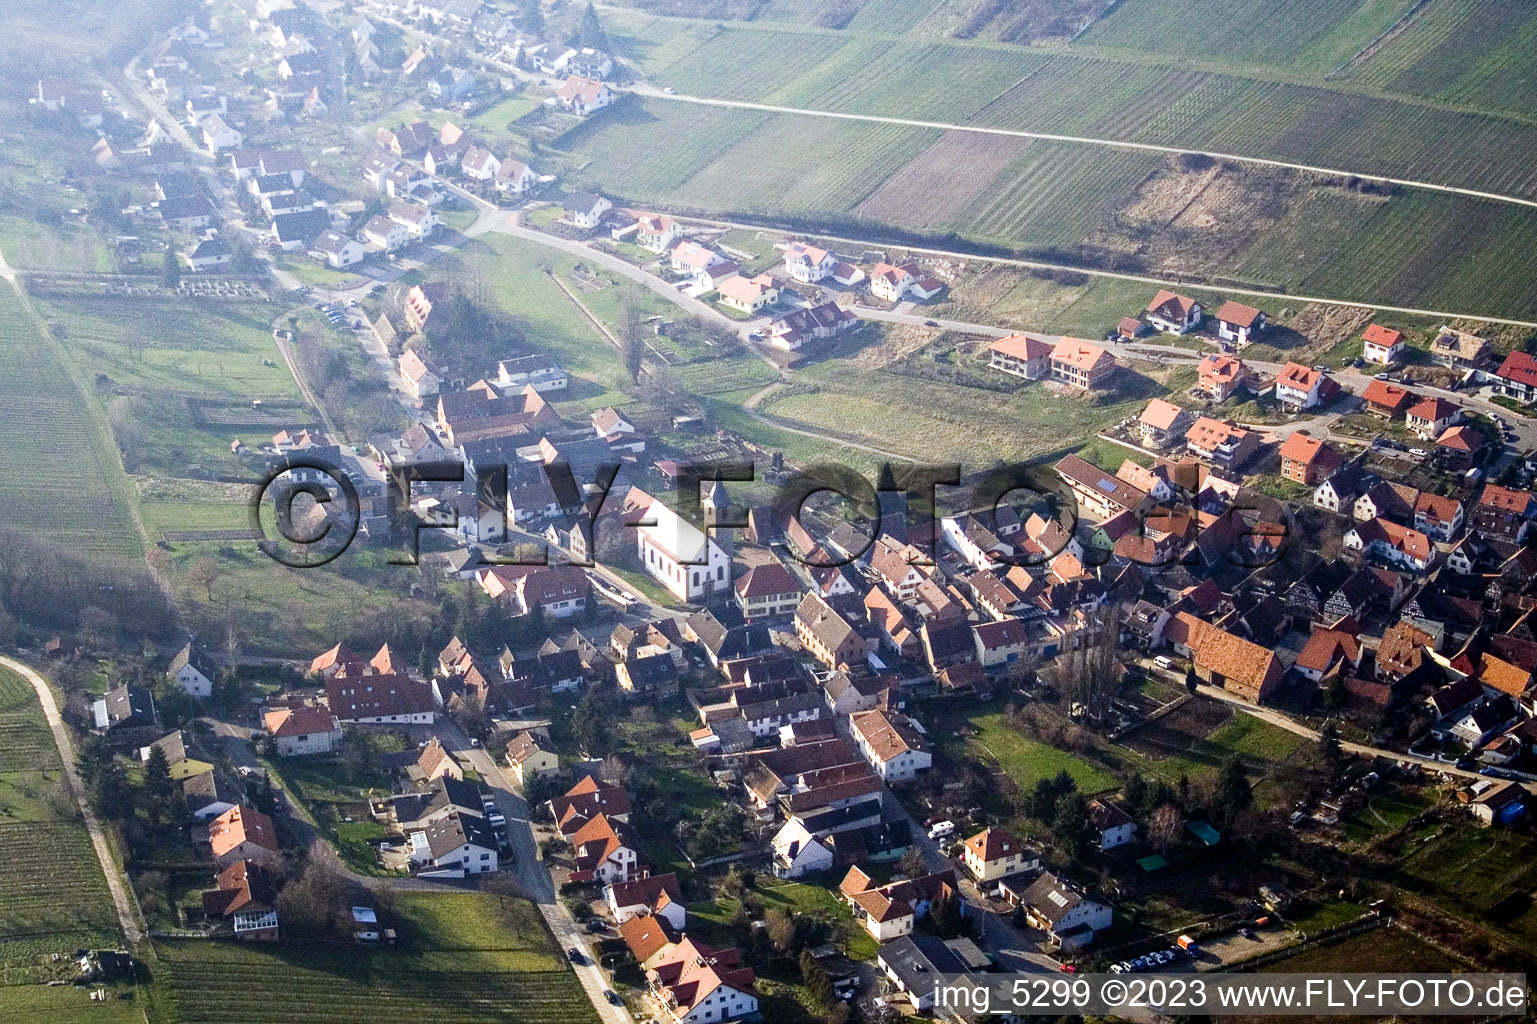 District Pleisweiler in Pleisweiler-Oberhofen in the state Rhineland-Palatinate, Germany from a drone